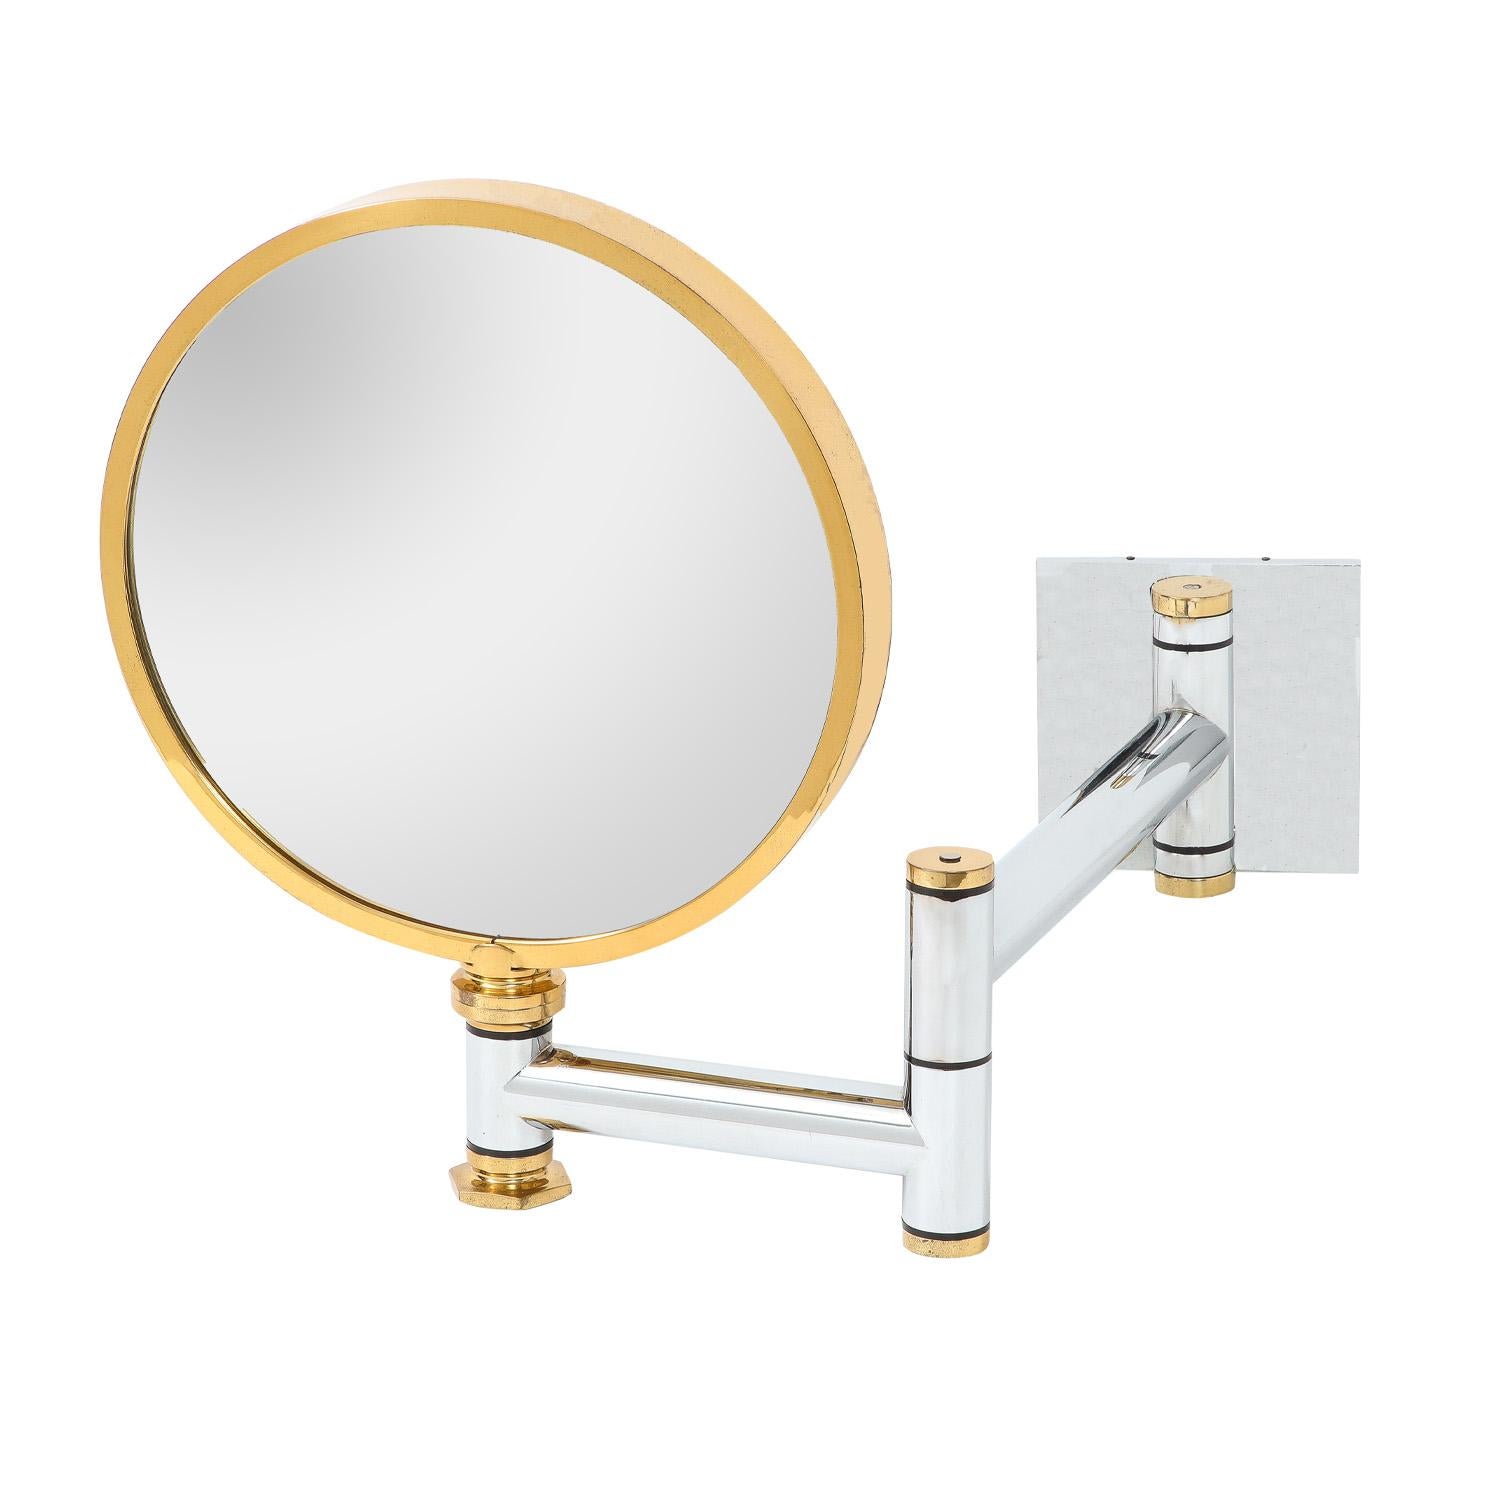 Rare wall-mount retractable finely crafted make up/shaving mirror in heavy gauge polished chrome and brass by Karl Springer, American 1980's. The craftsmanship of this mirror is off the charts. The combination of metal is very chic.

Closed